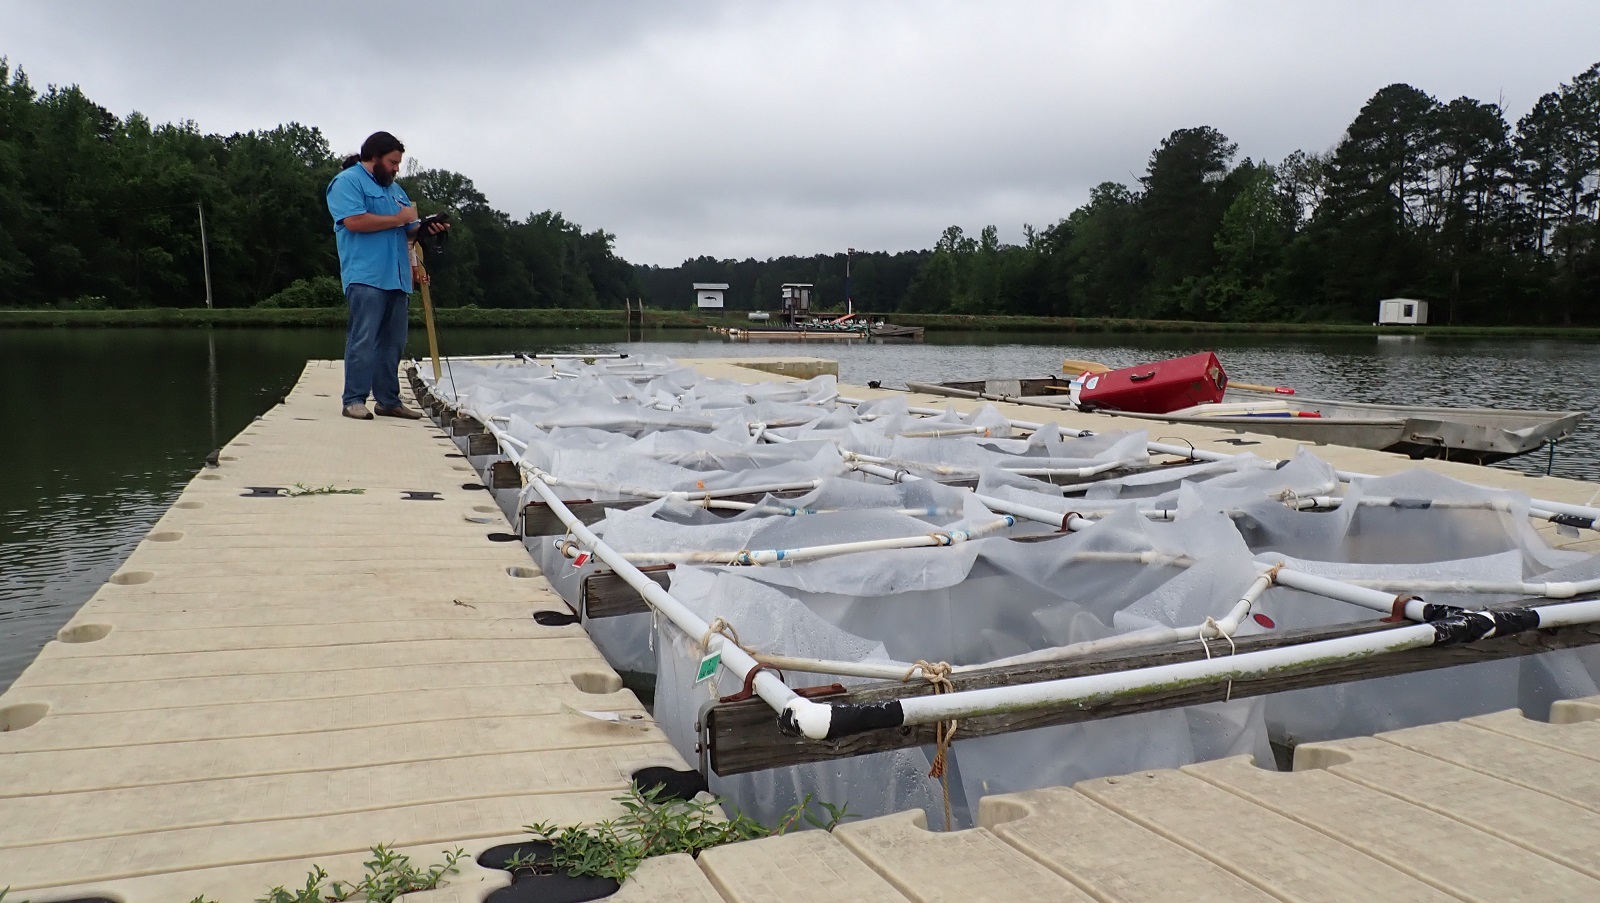 Alan Wilson conducts research on algal blooms at a lake in the Auburn area.